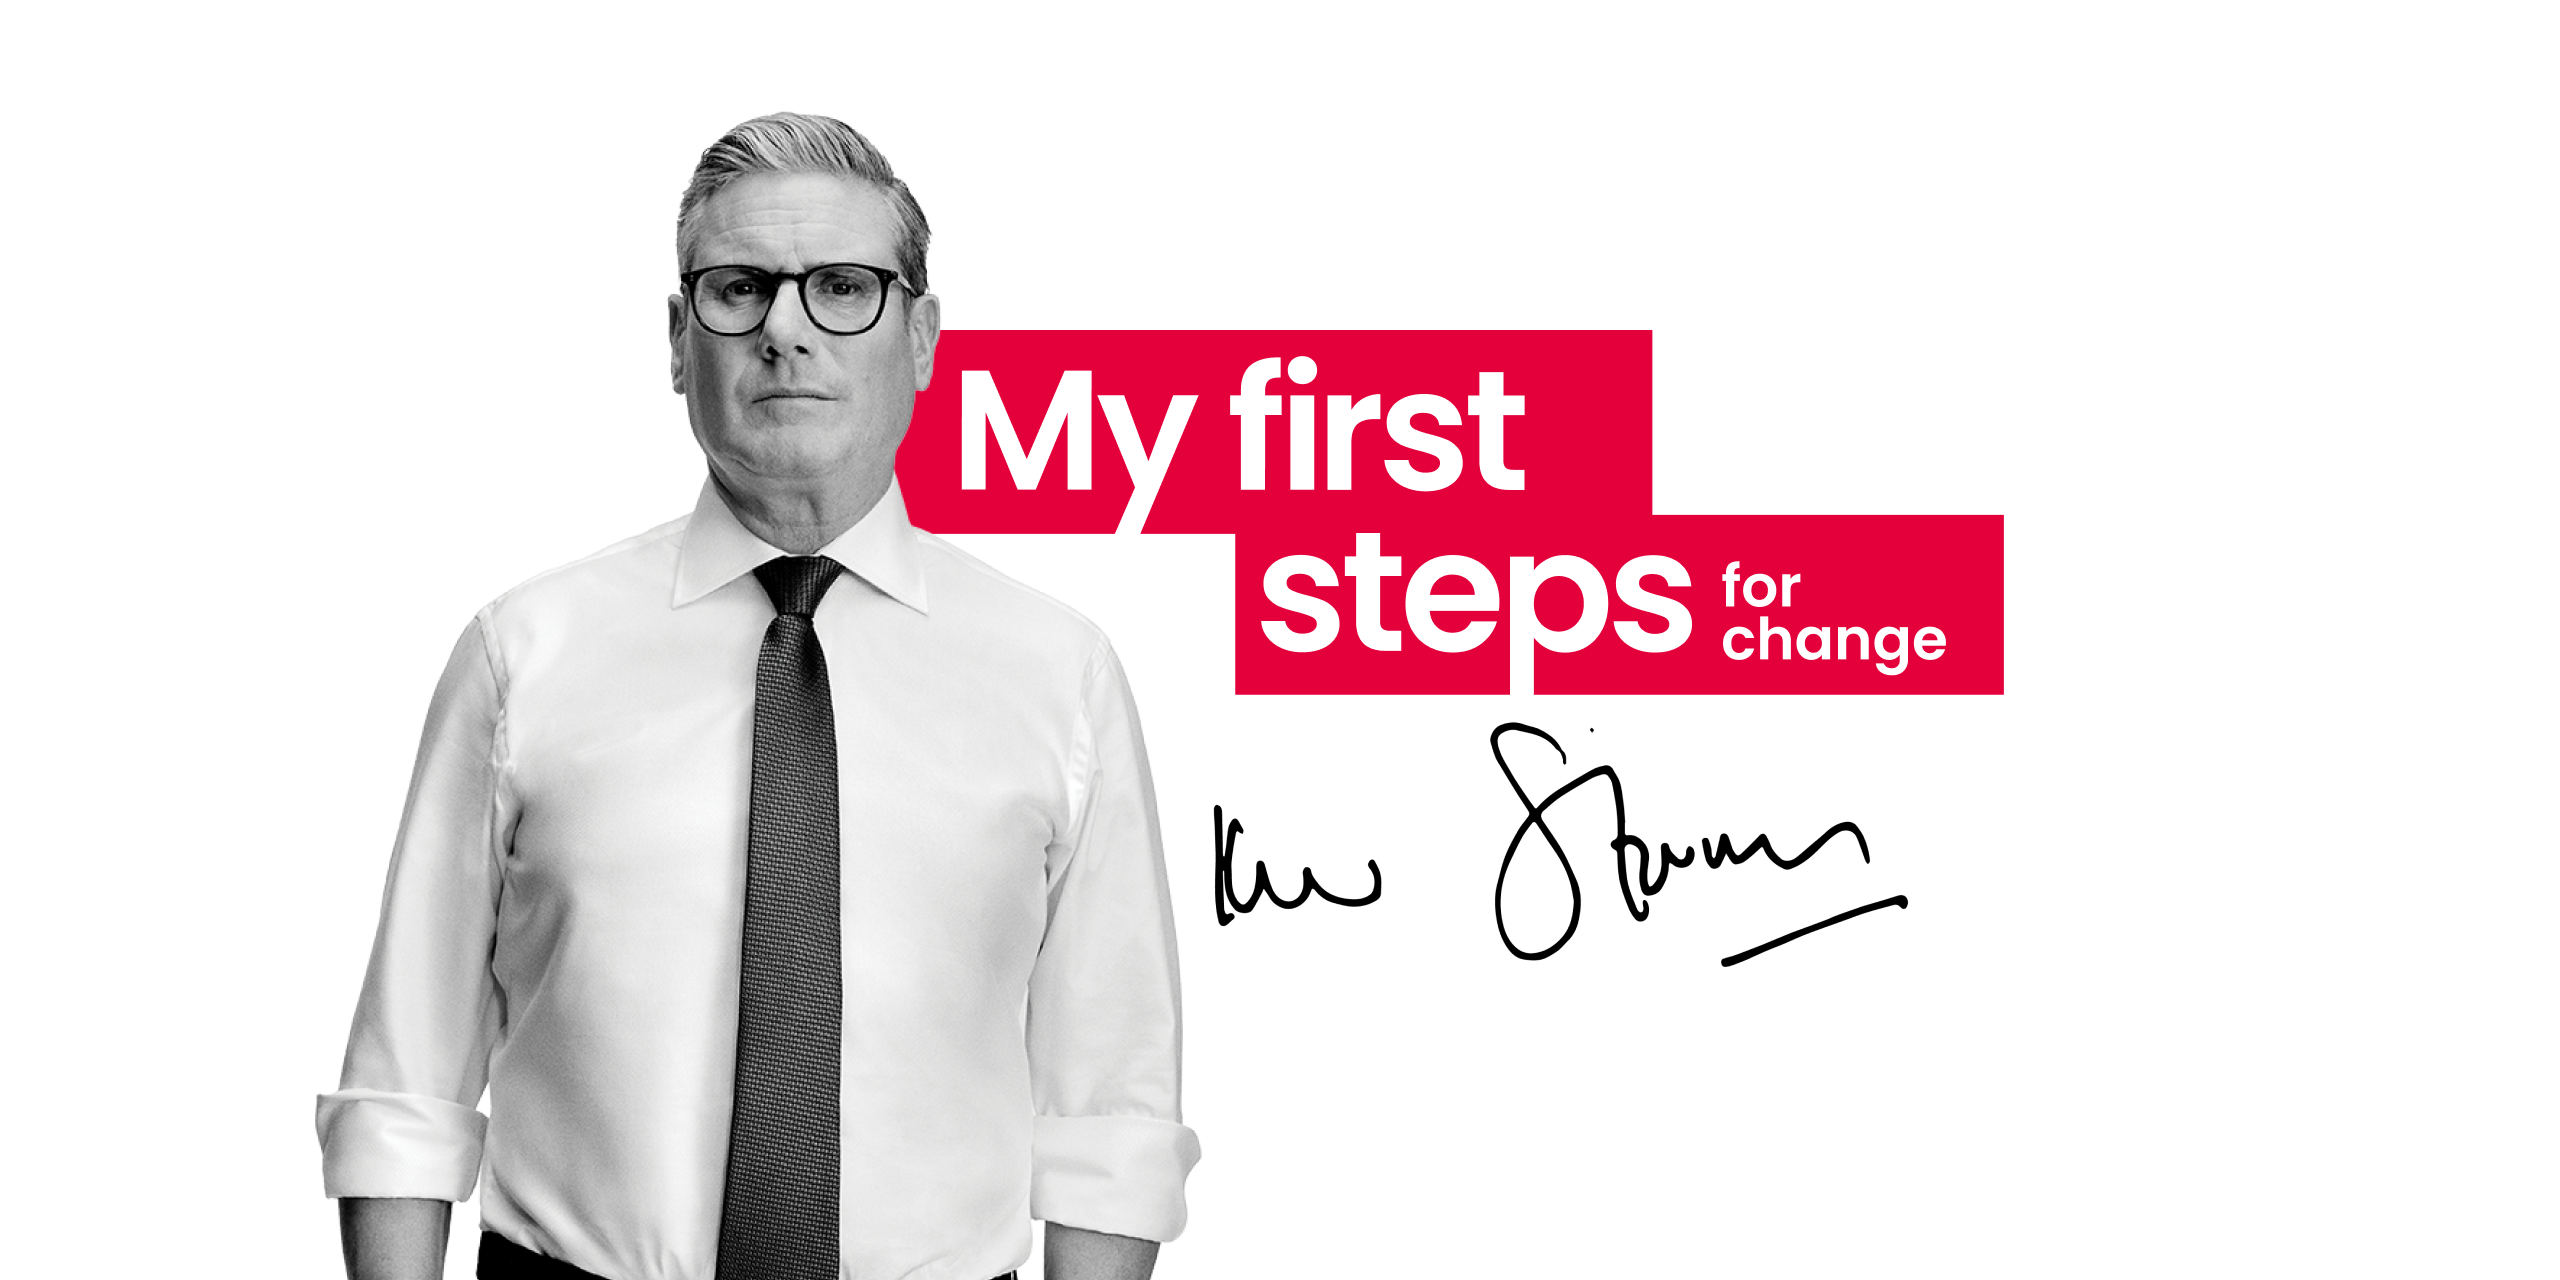 A photo of Keir Starmer next to the words 'My first steps for change', and his signature underneath.